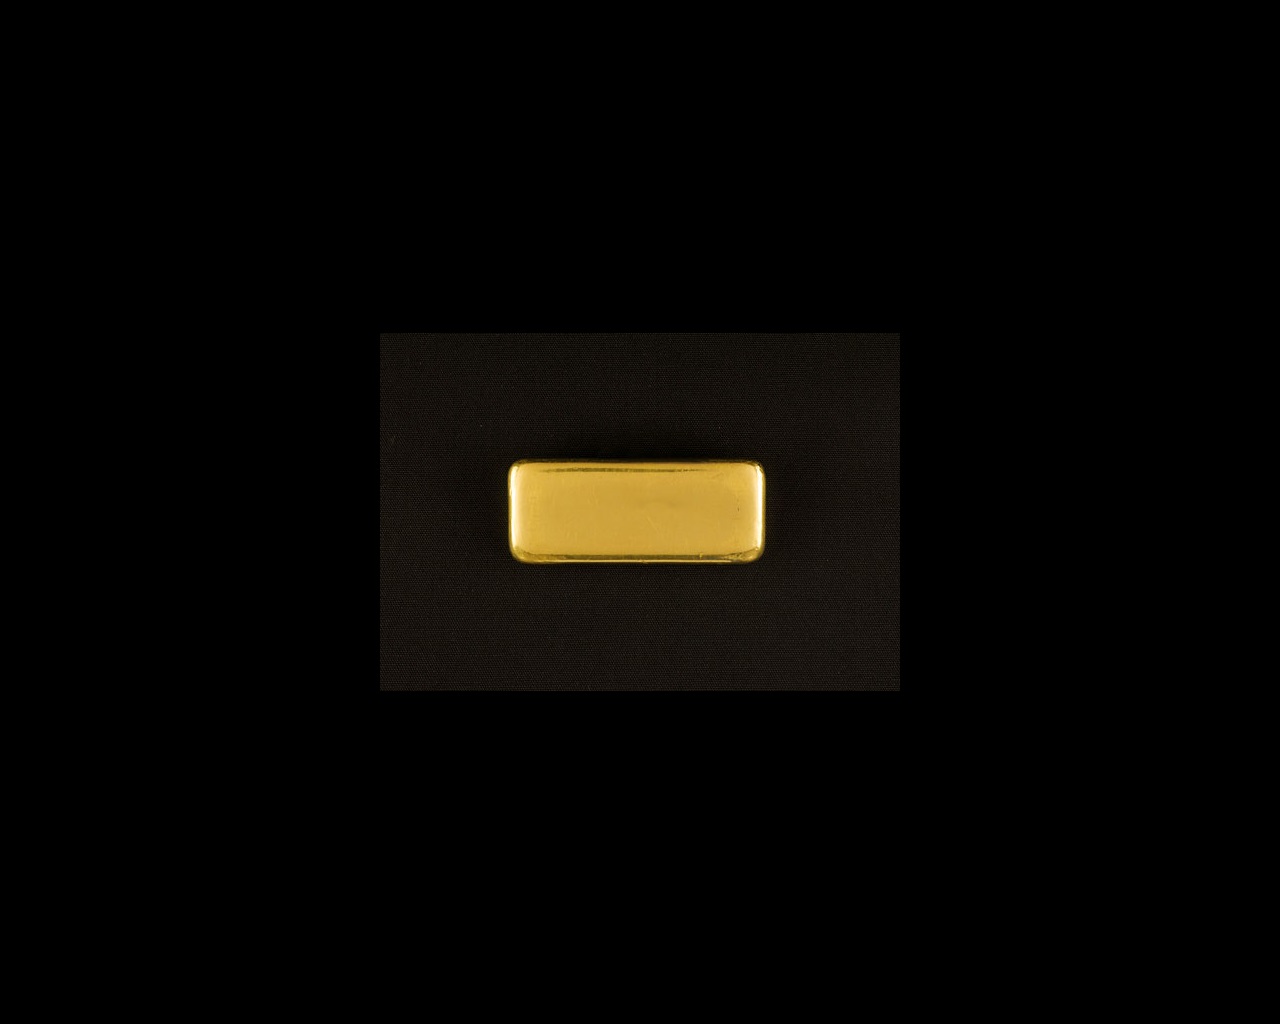 A shiny gold bar with smooth unmarked surfaces and rounded corners, that stands out brightly from a black background